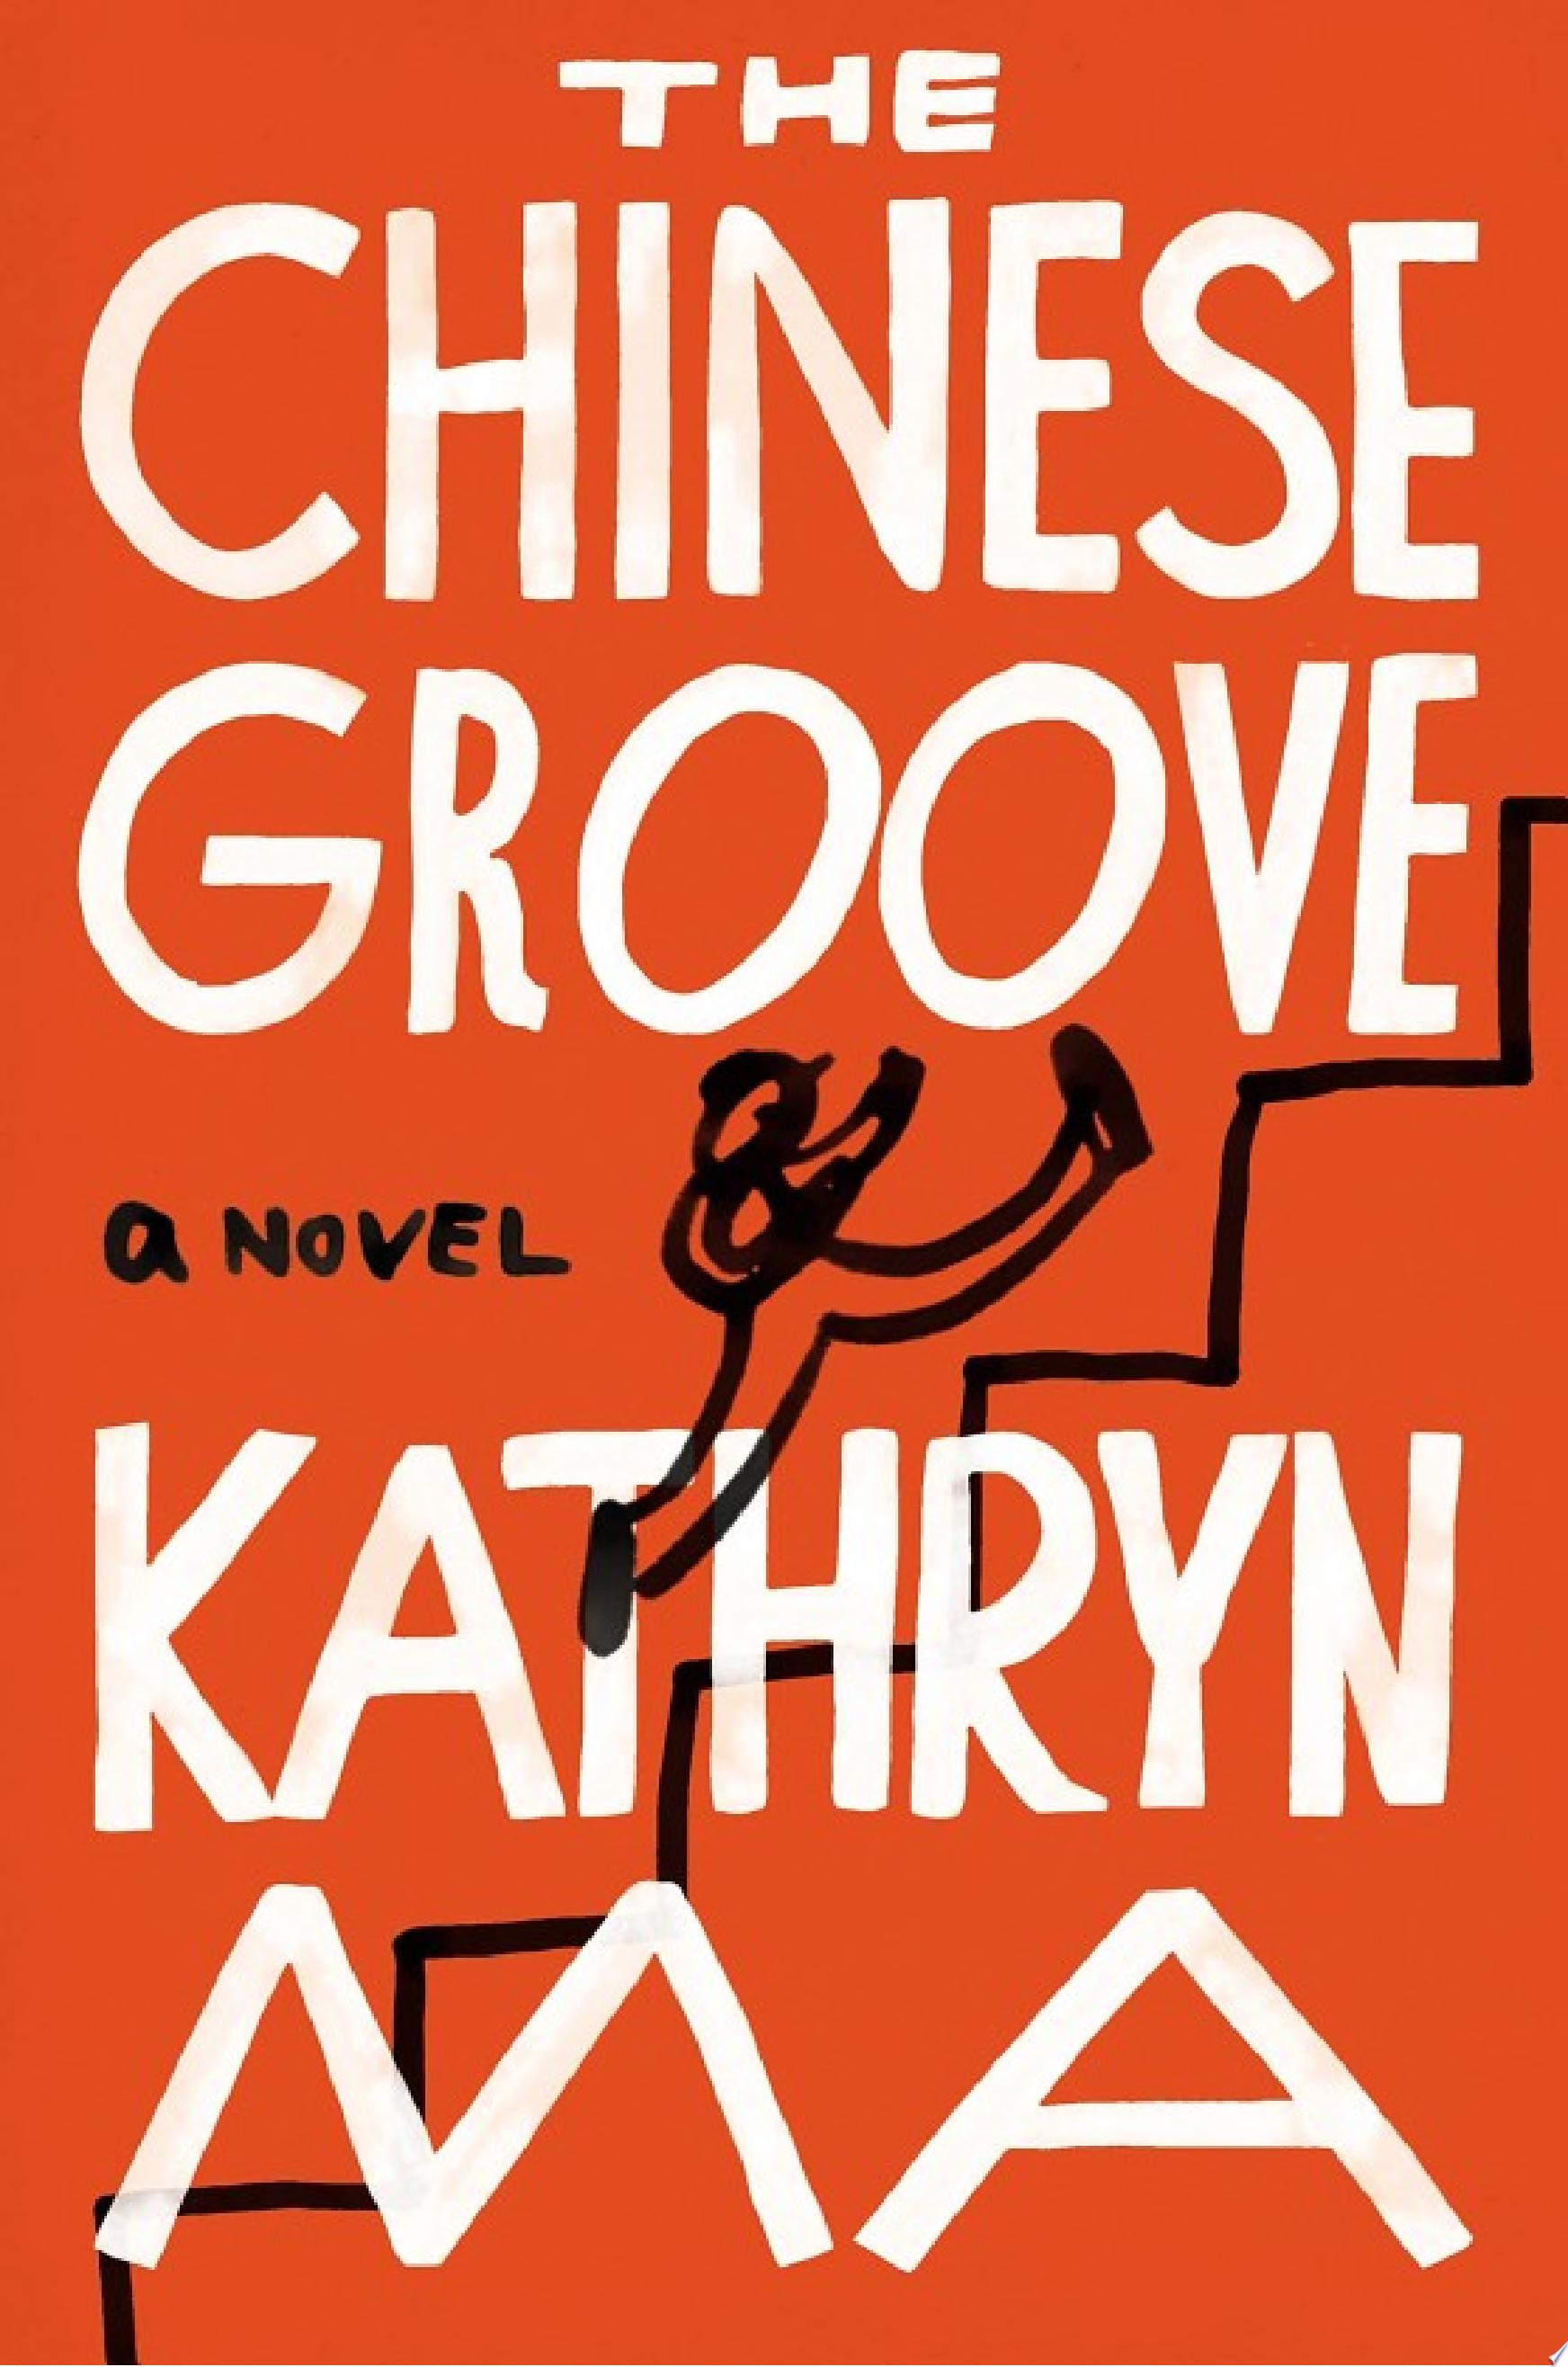 Image for "The Chinese Groove"